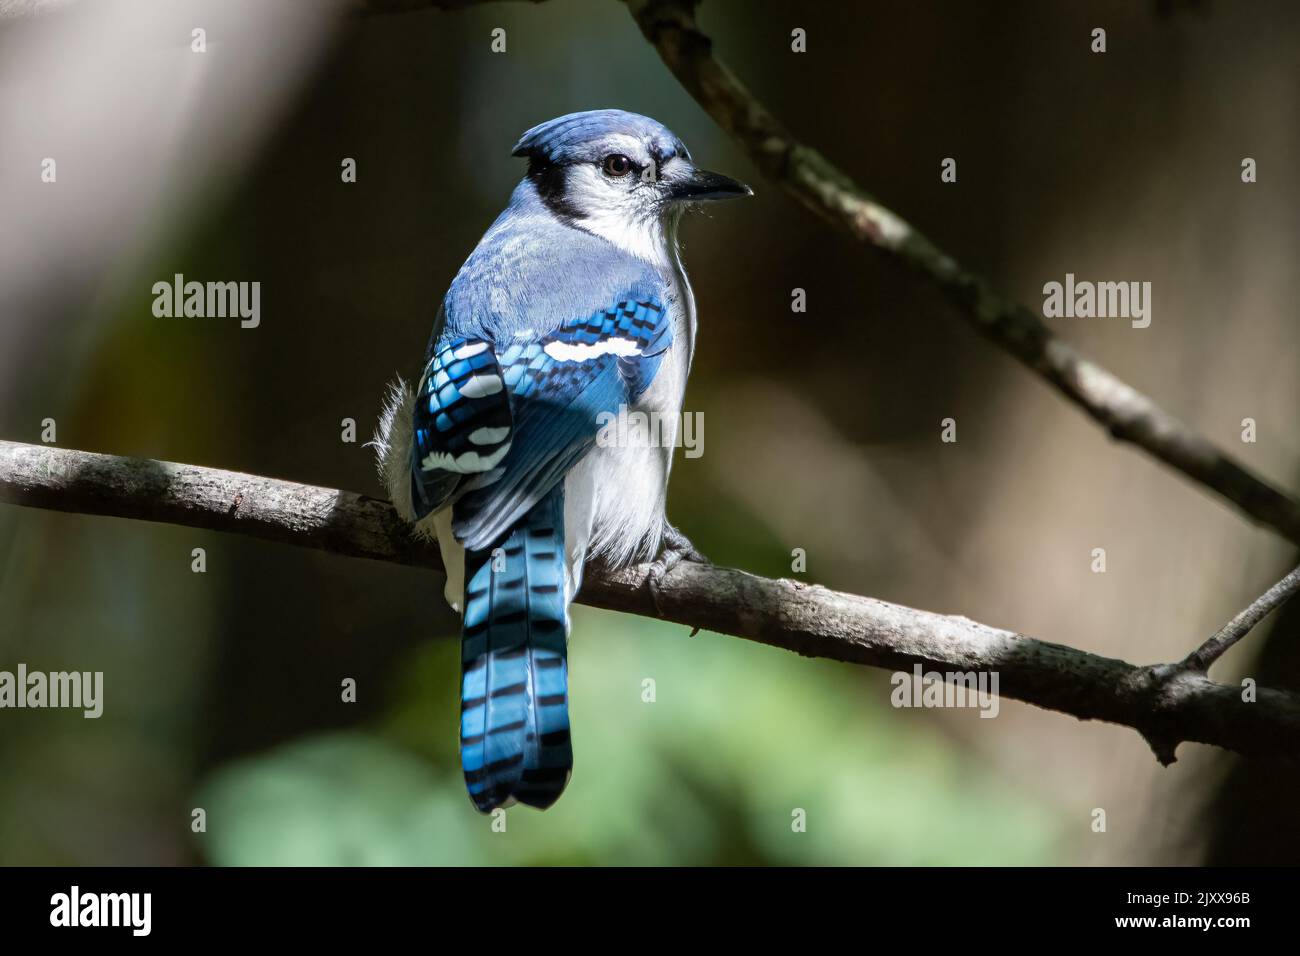 Bluejay on branch from behind. Stock Photo